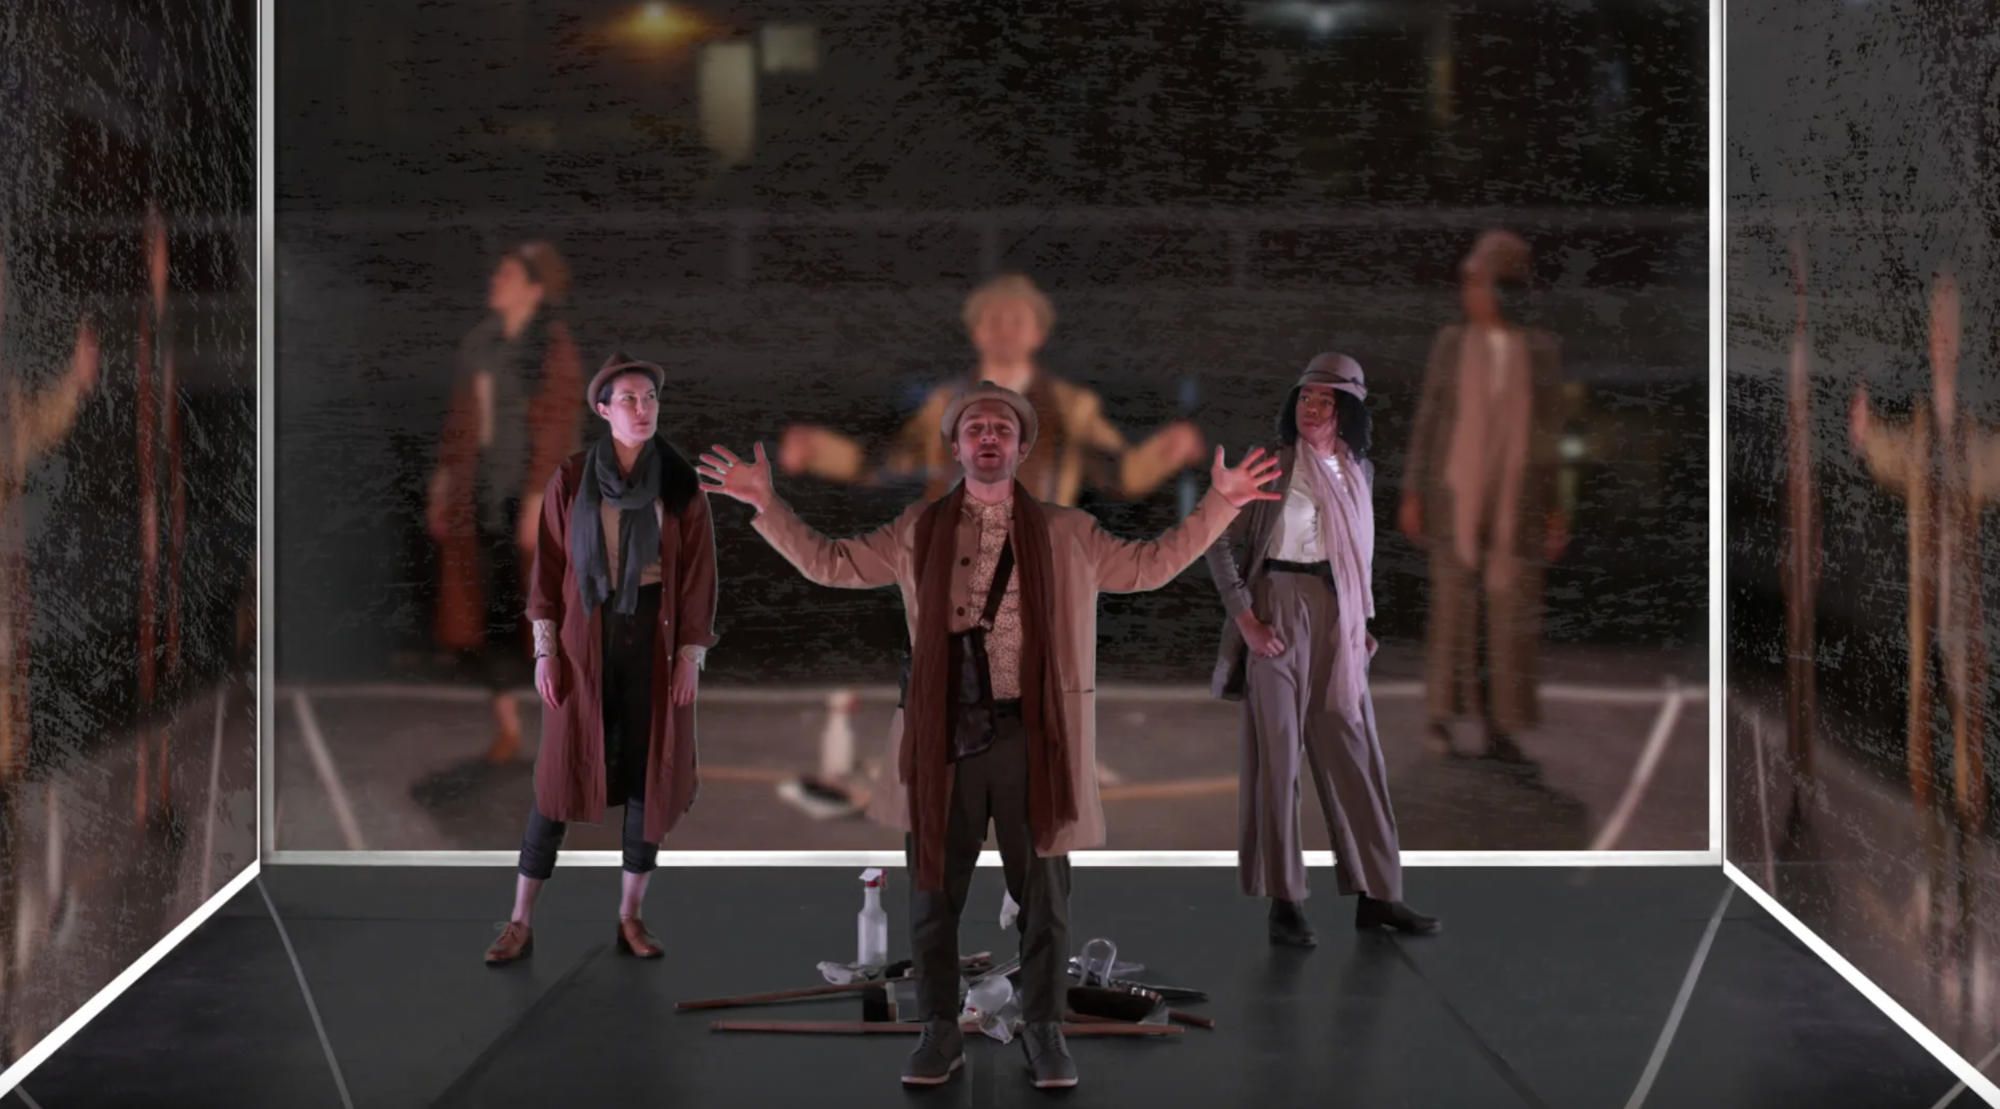 A group of performers act in a mirrored box.